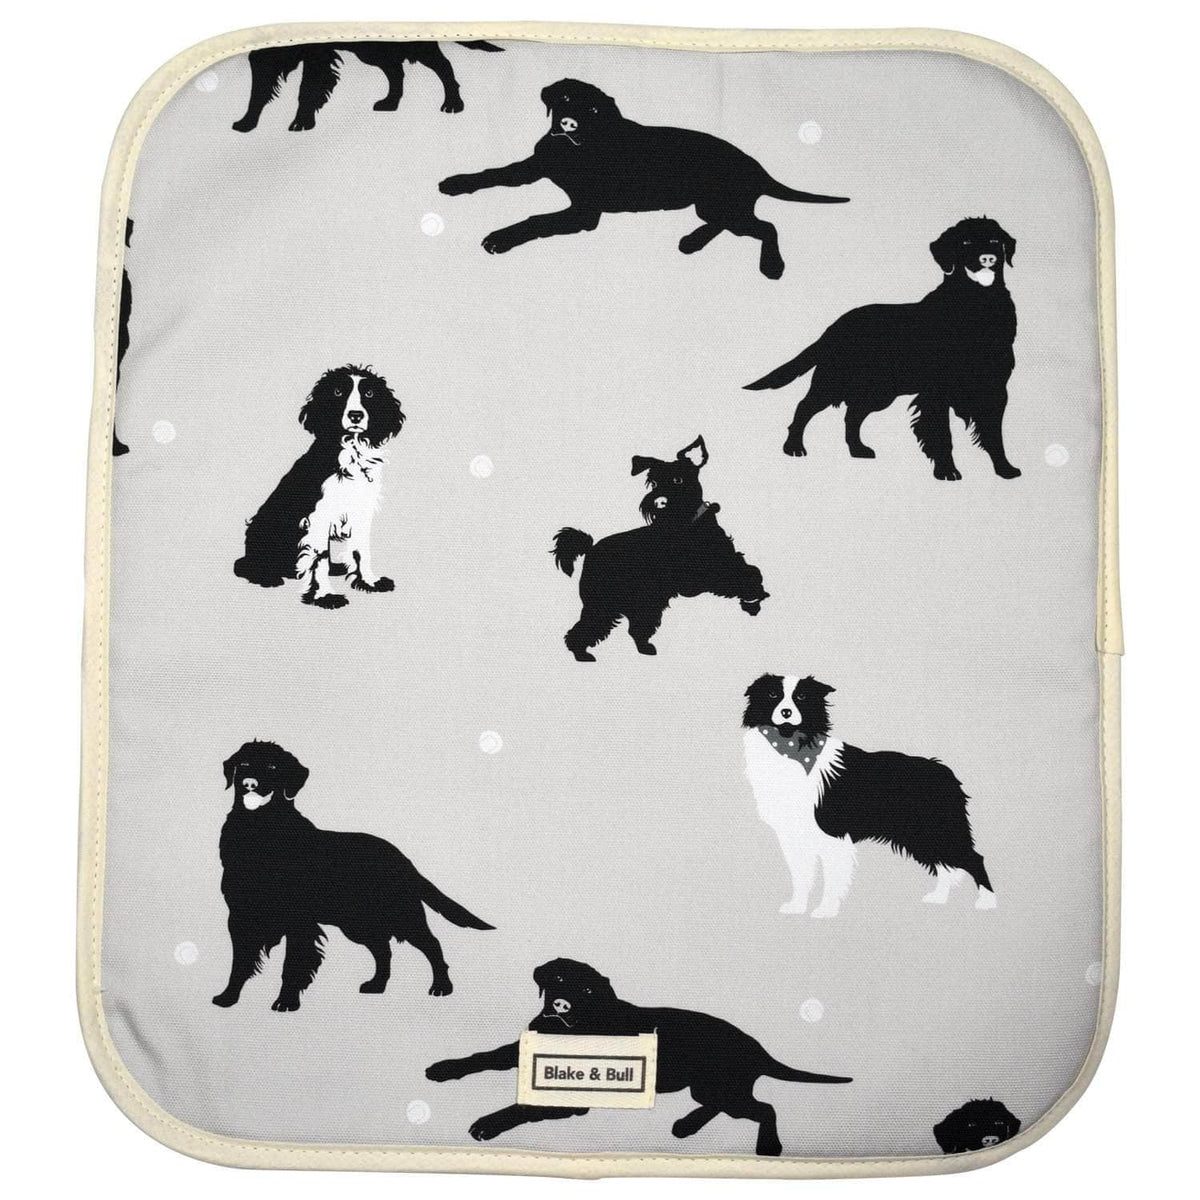 *Not quite perfect* Warming plate cover for use with Aga range cookers - &#39;Good dog!&#39;